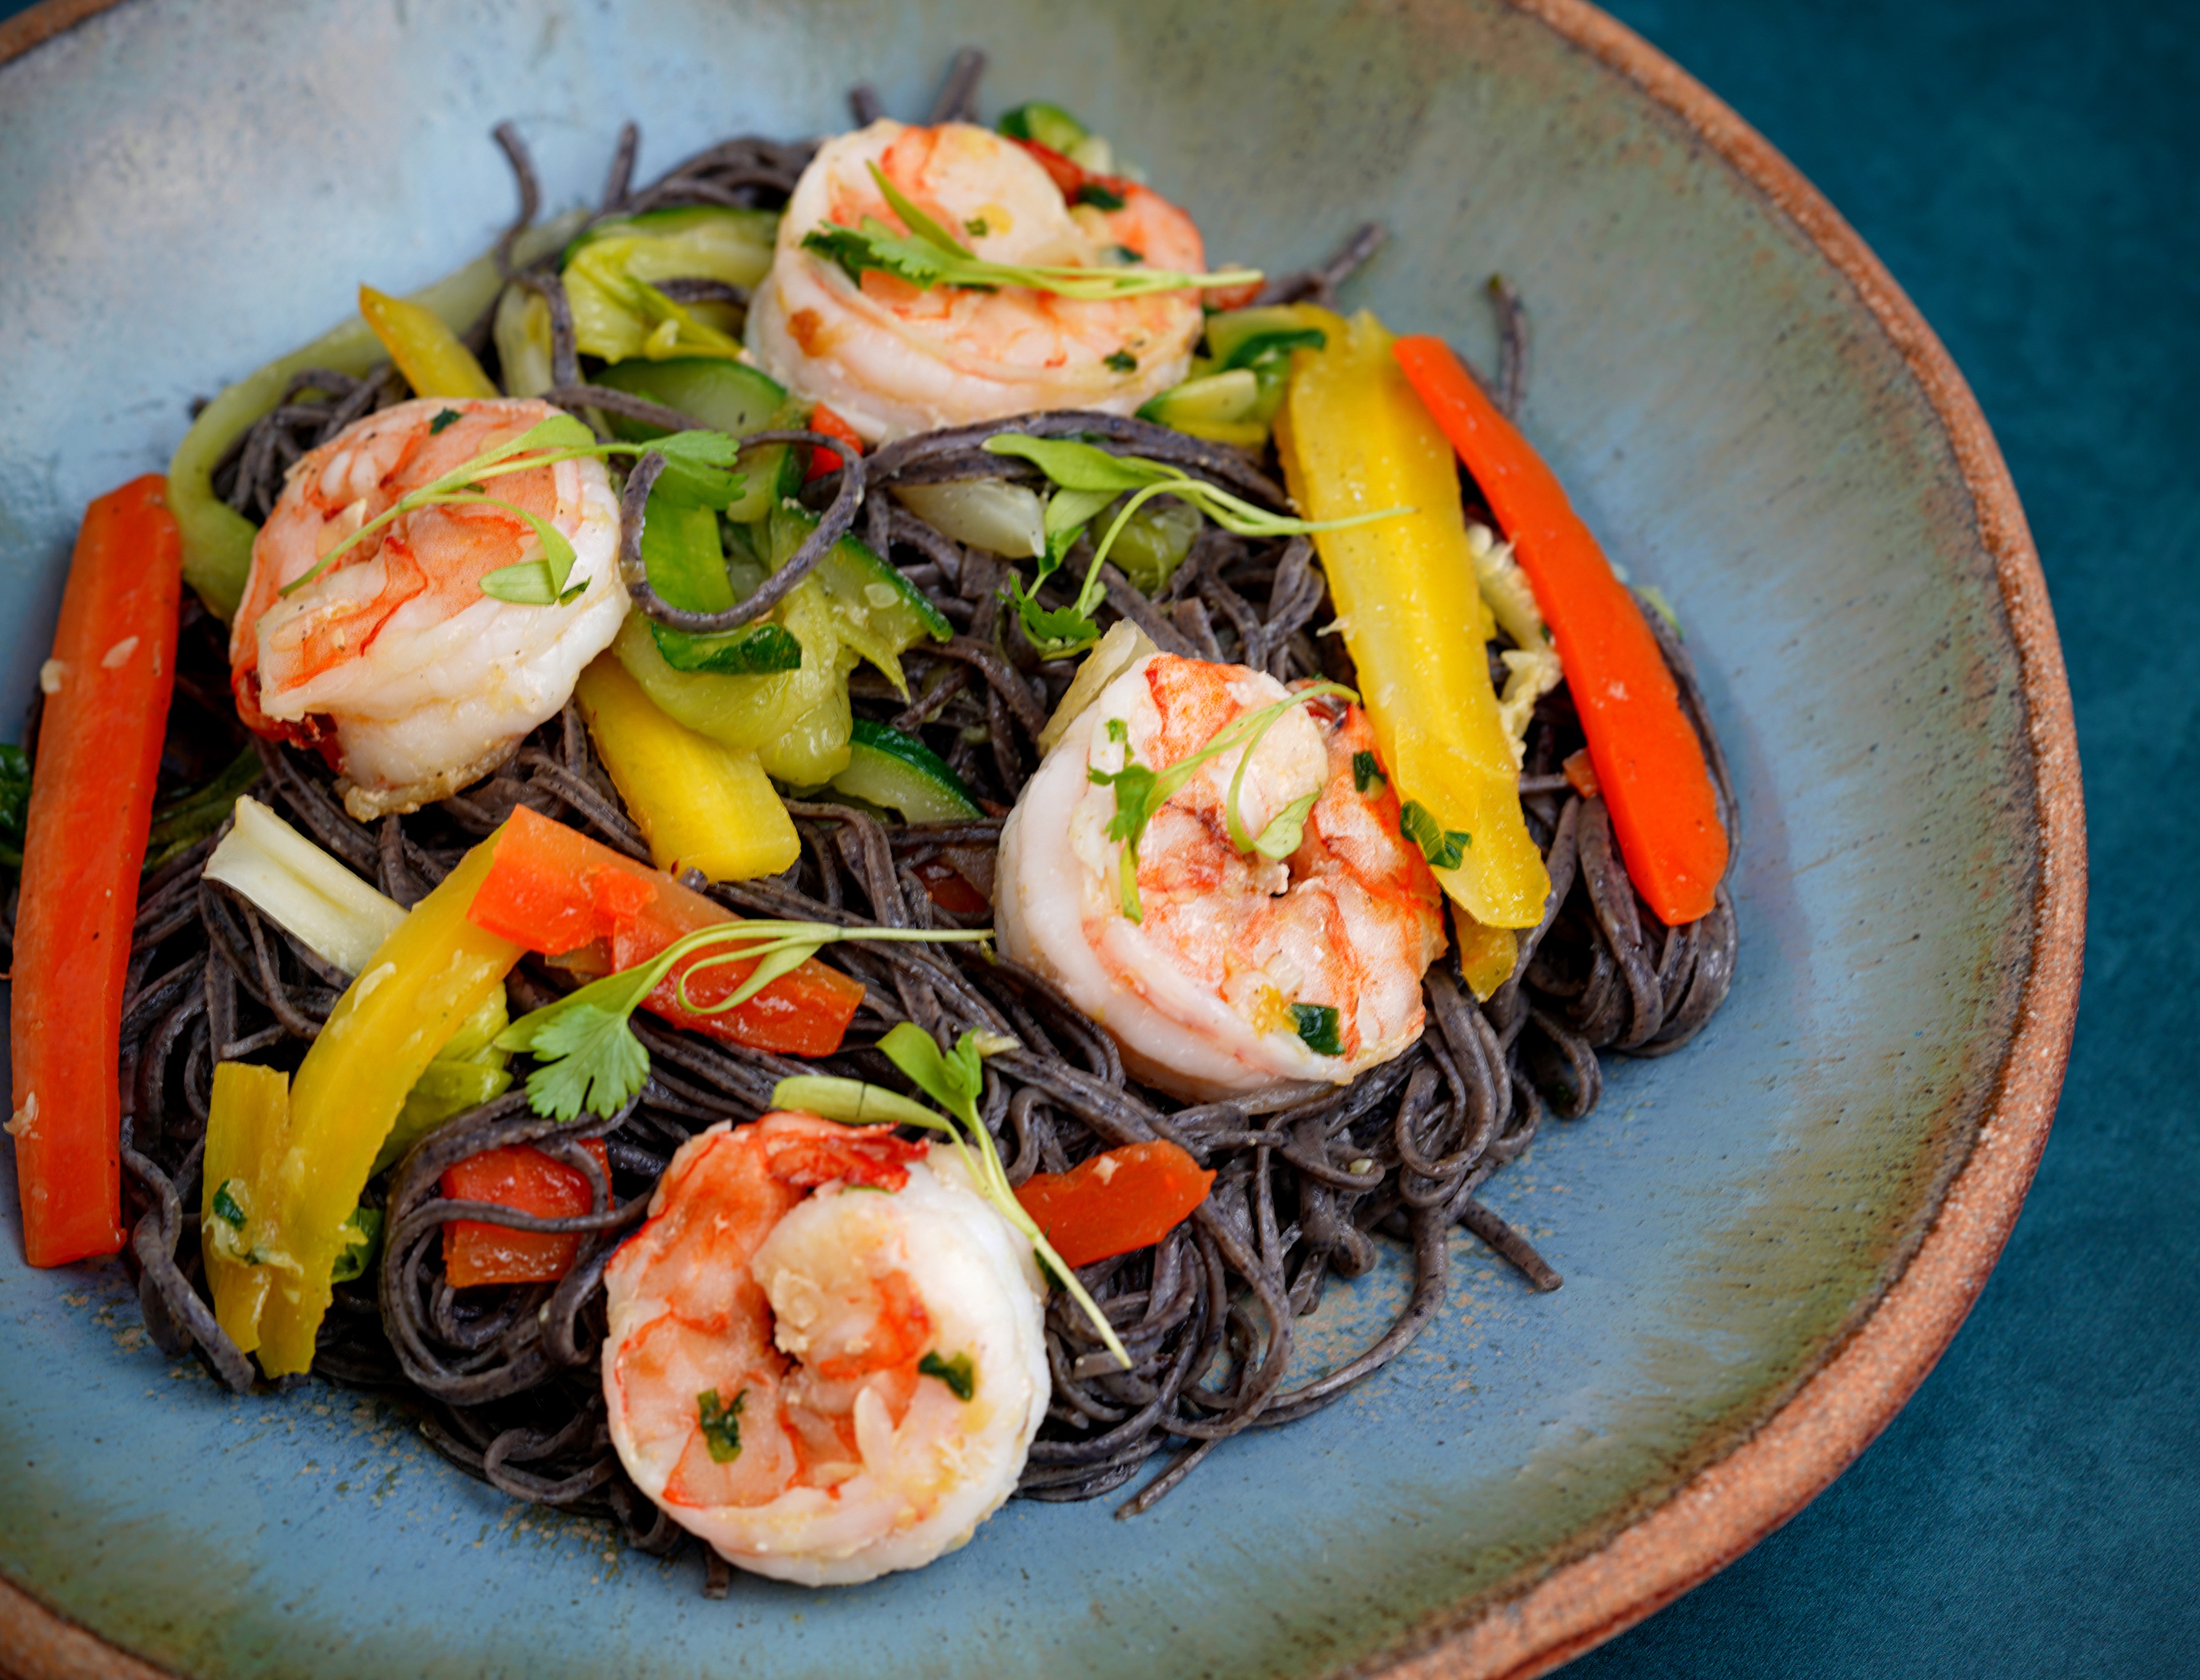 Black Bean Noodles with Prawns and Greens